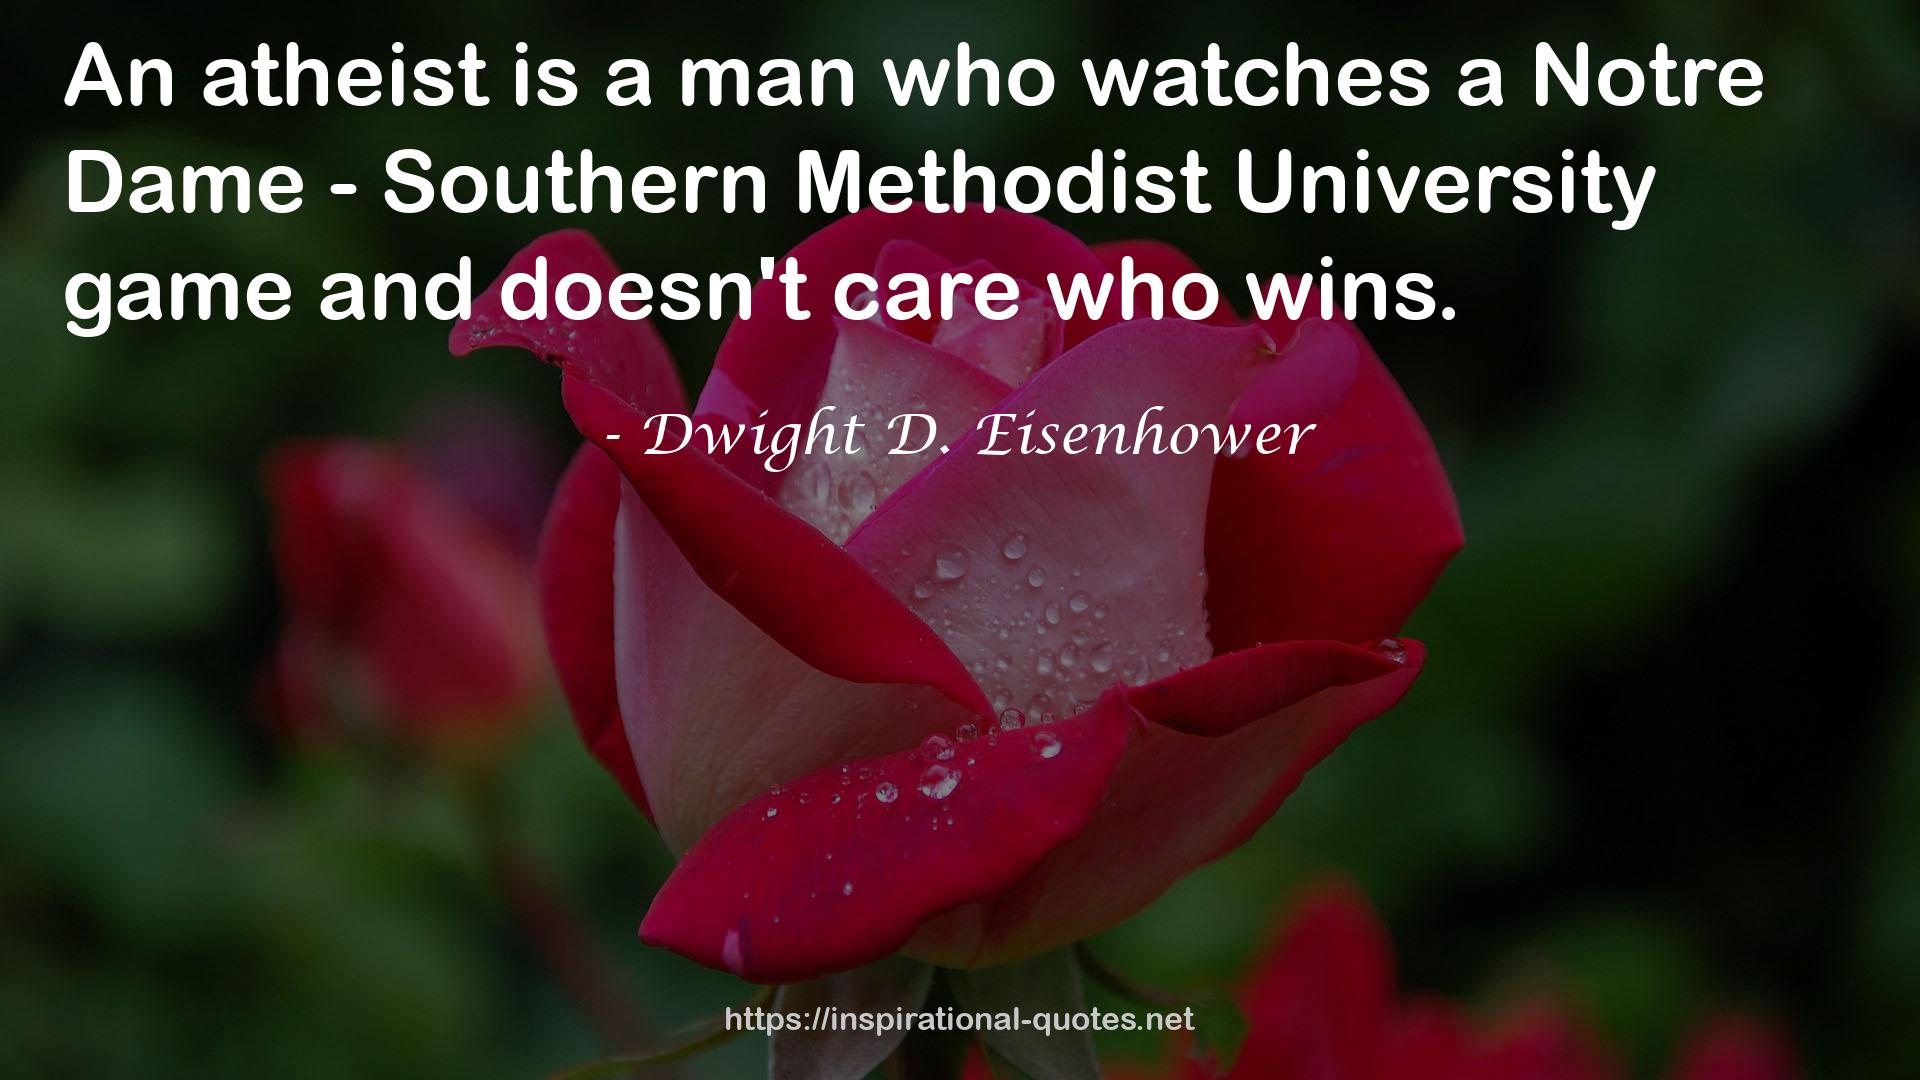 Notre Dame - Southern Methodist University  QUOTES